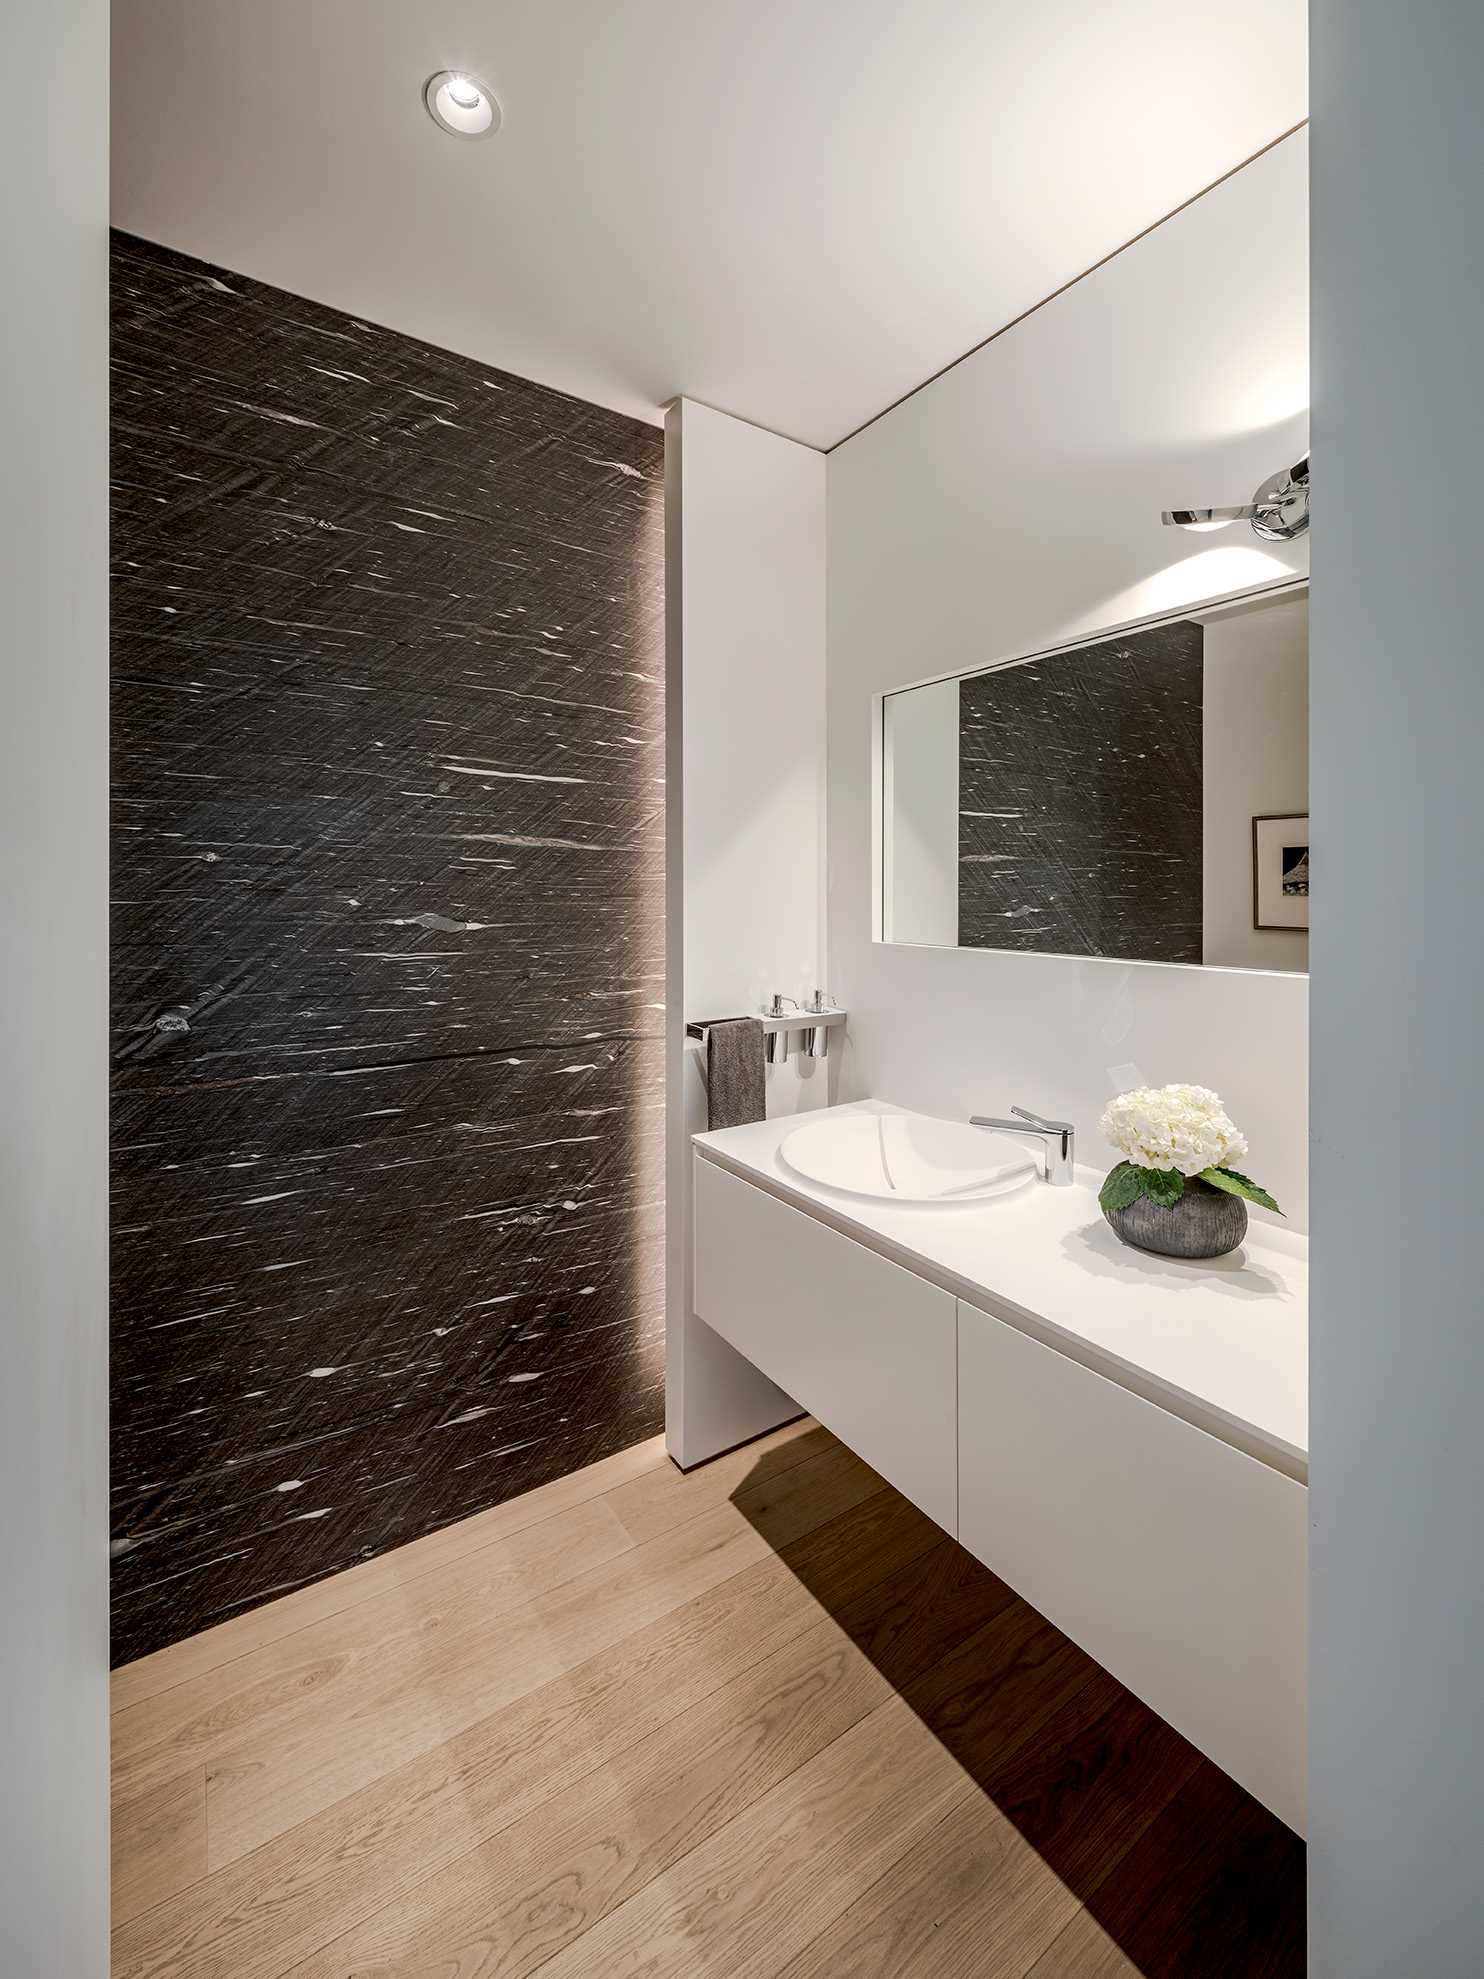 This modern bathroom has a dark accent wall with hidden lighting that contrasts the white vanity and walls.